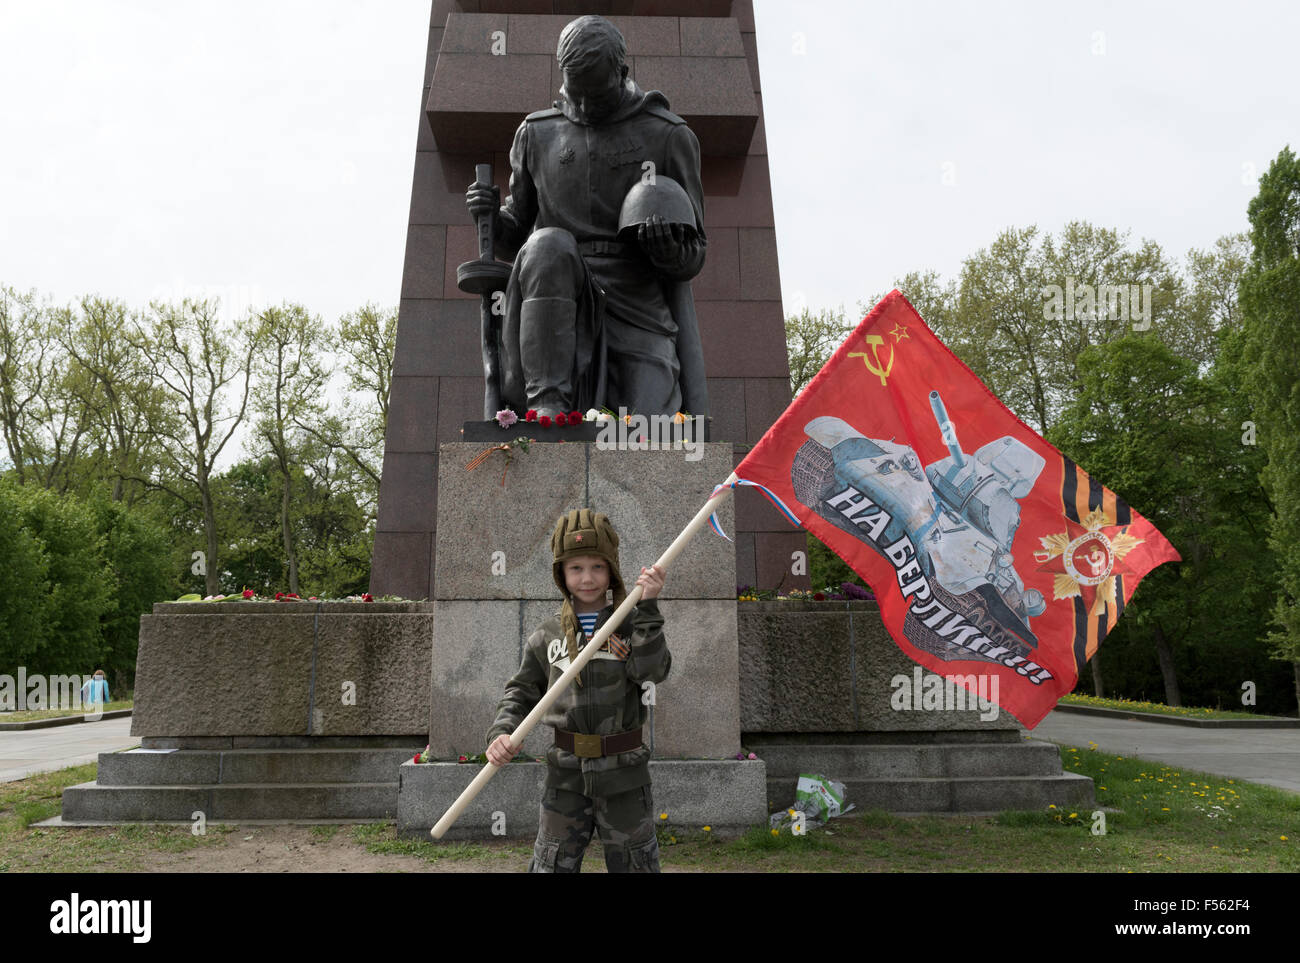 '08.05.2015, Berlin, Berlin, Germany - Soviet War Memorial Treptow, the 70th anniversary of the end of World War II that 9 May is considered in Russia as Victory Day over Nazi Germany, Mark has traveled with his parents all the way from Russia, he wears a Panzerfahrermuetze and proudly holds a banner with a T34 tank and the text in Russian ''to Berlin''. EBS150508D500CAROEX.JPG - NOT for SALE in G E R M A N Y, A U S T R I A, S W I T Z E R L A N D [MODEL RELEASE: NO, PROPERTY RELEASE: NO (c) caro photo agency / Schulz, http://www.caro-images.pl, info@carofoto.pl - In case of using the picture f Stock Photo